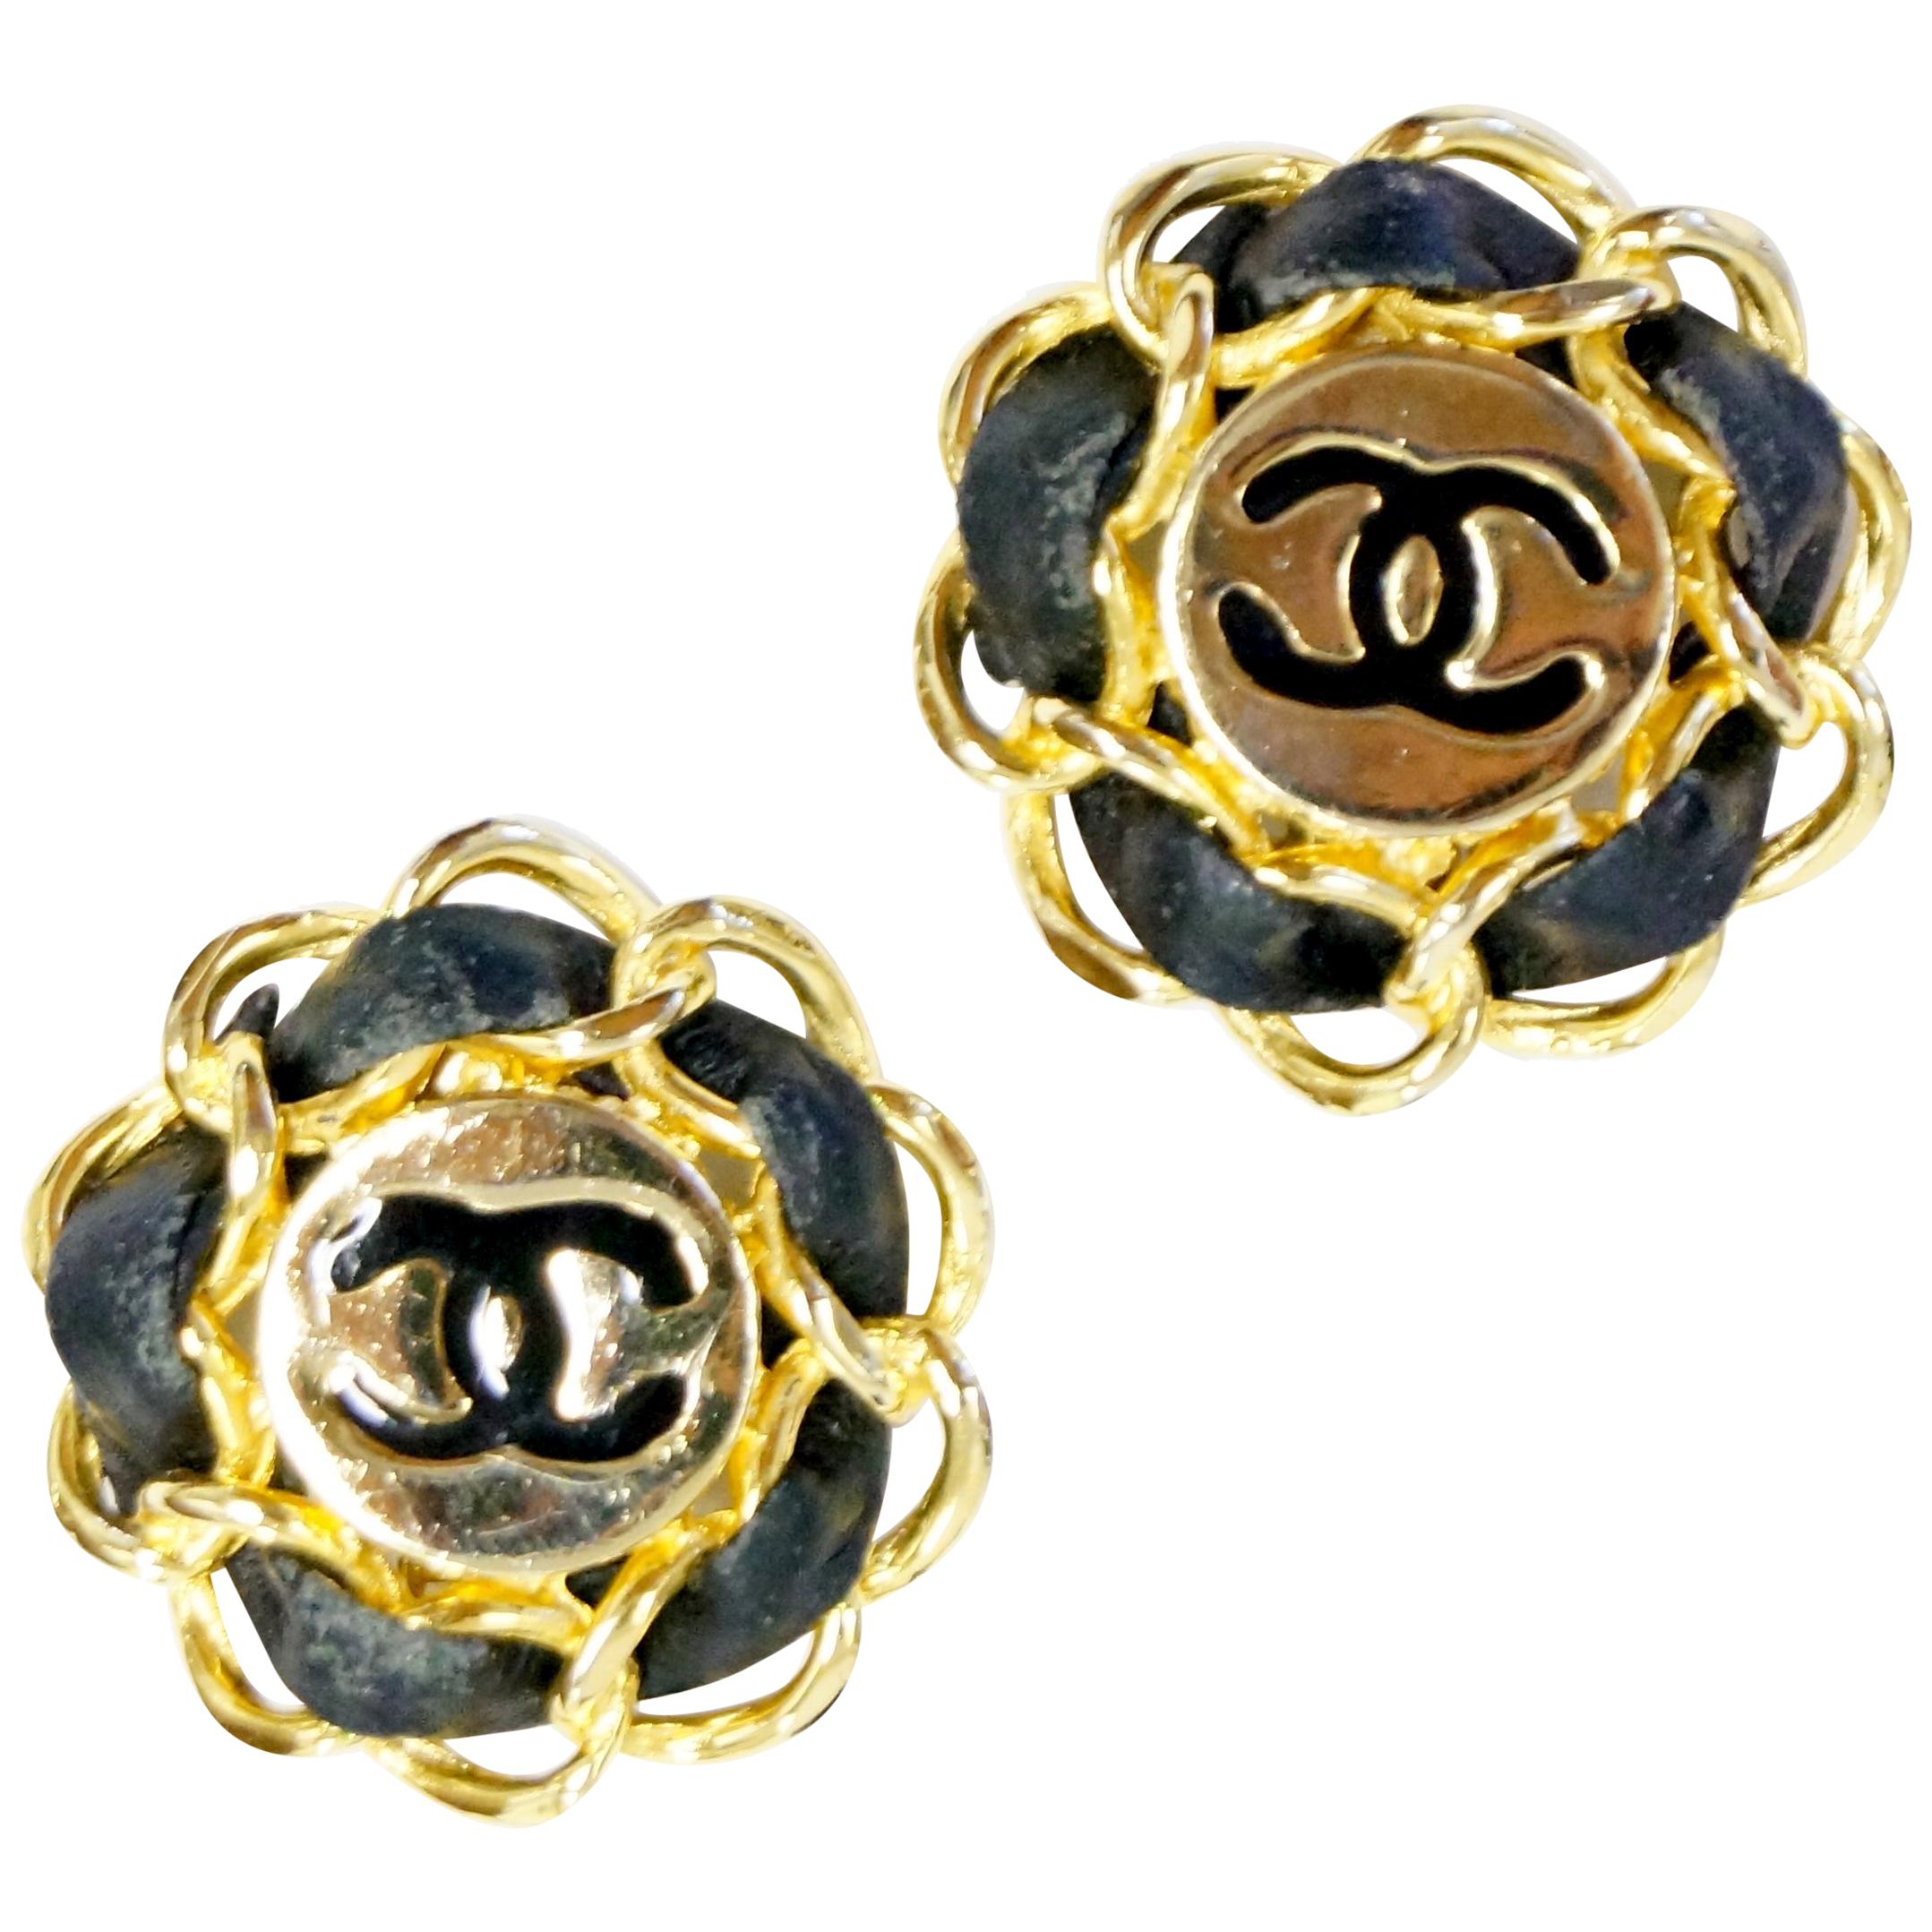 Iconic 1980s Chanel Logo Gold and Leather Clip Earrings